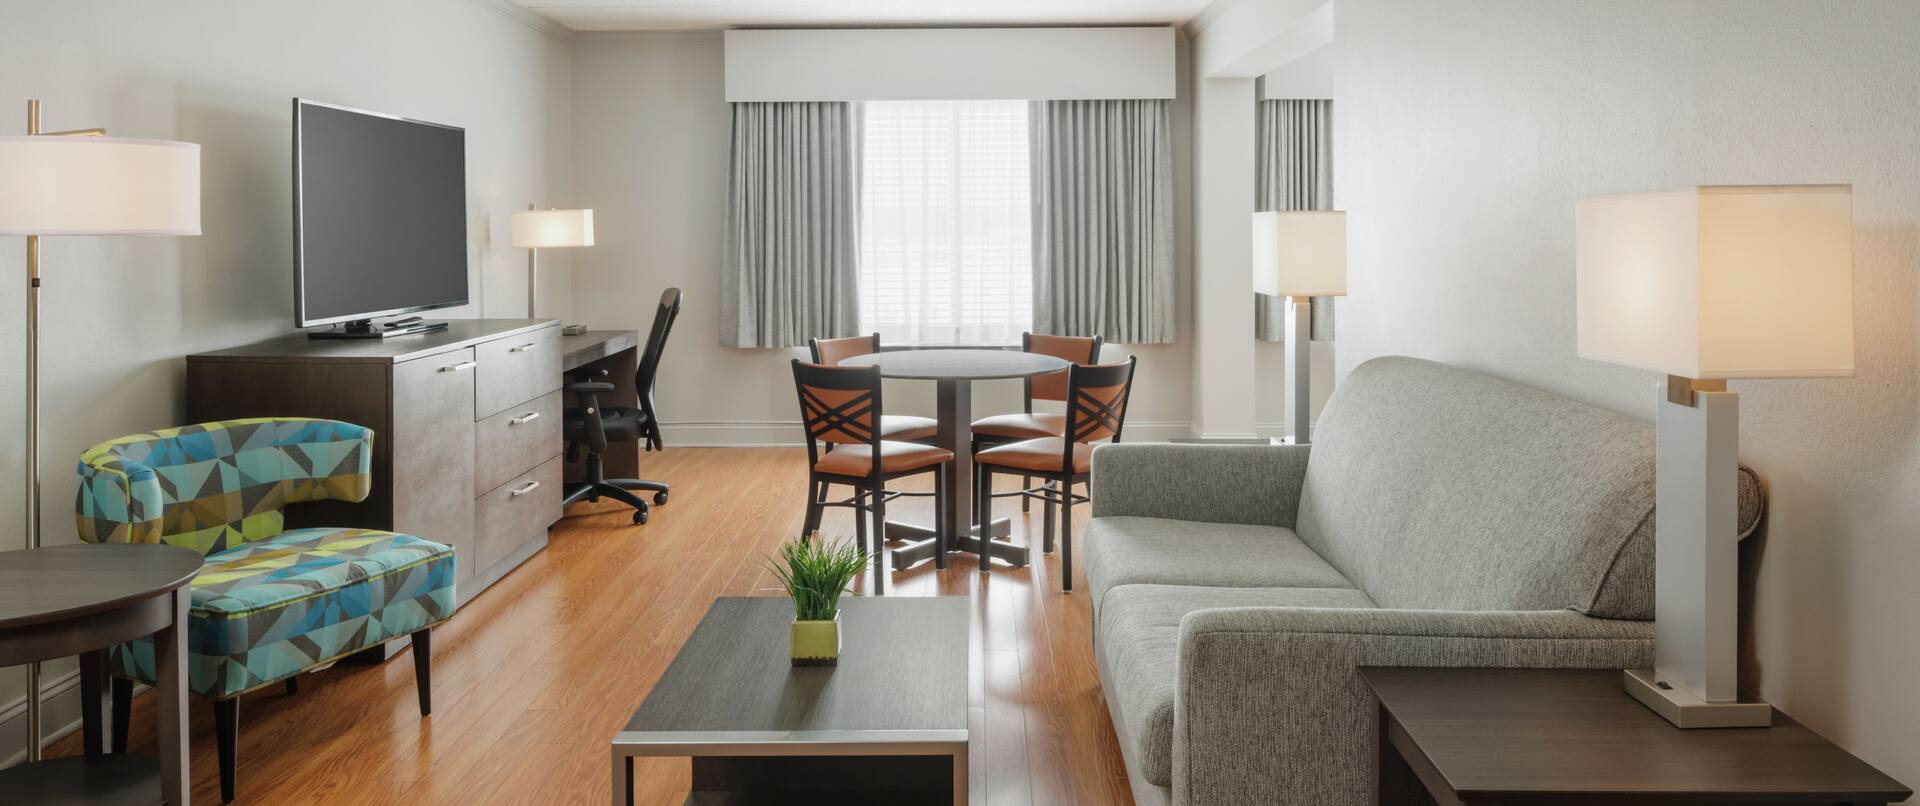 Suite living area with tables and chairs